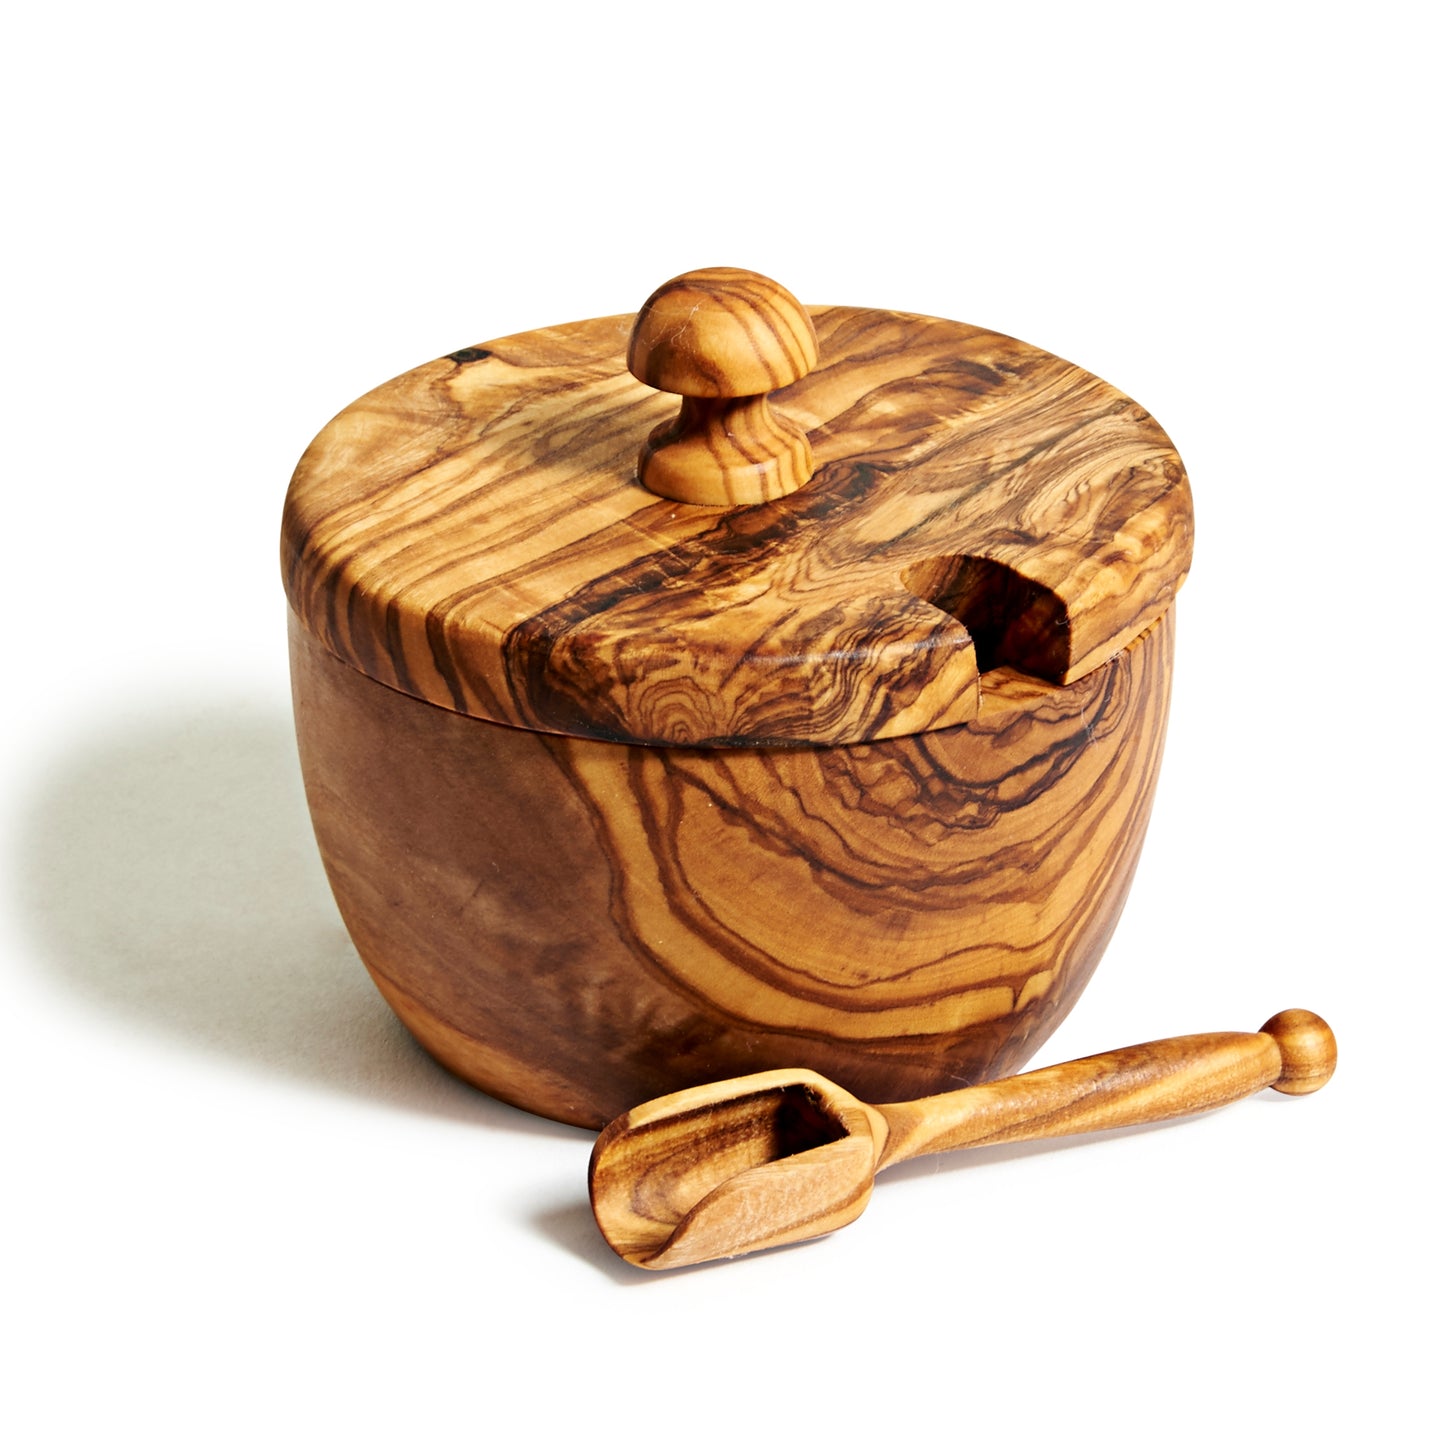 Tunisian Olive Wood Sugar Bowl and Scoop